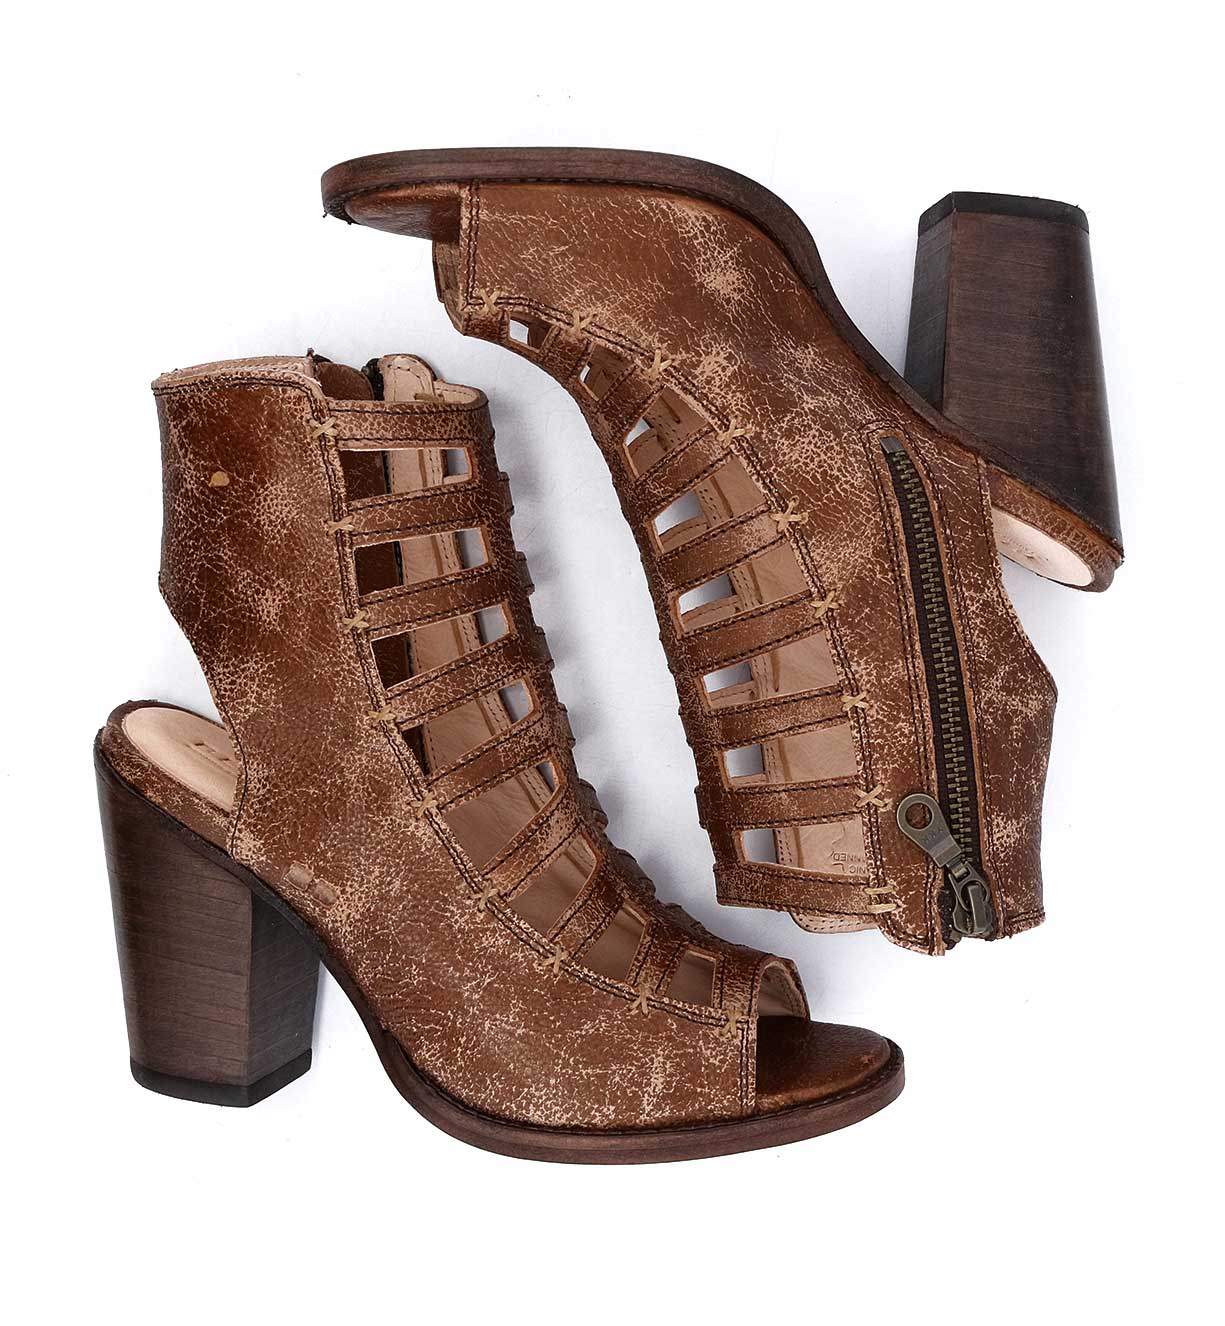 A pair of Bed Stu Occam P sandals with a wooden heel.